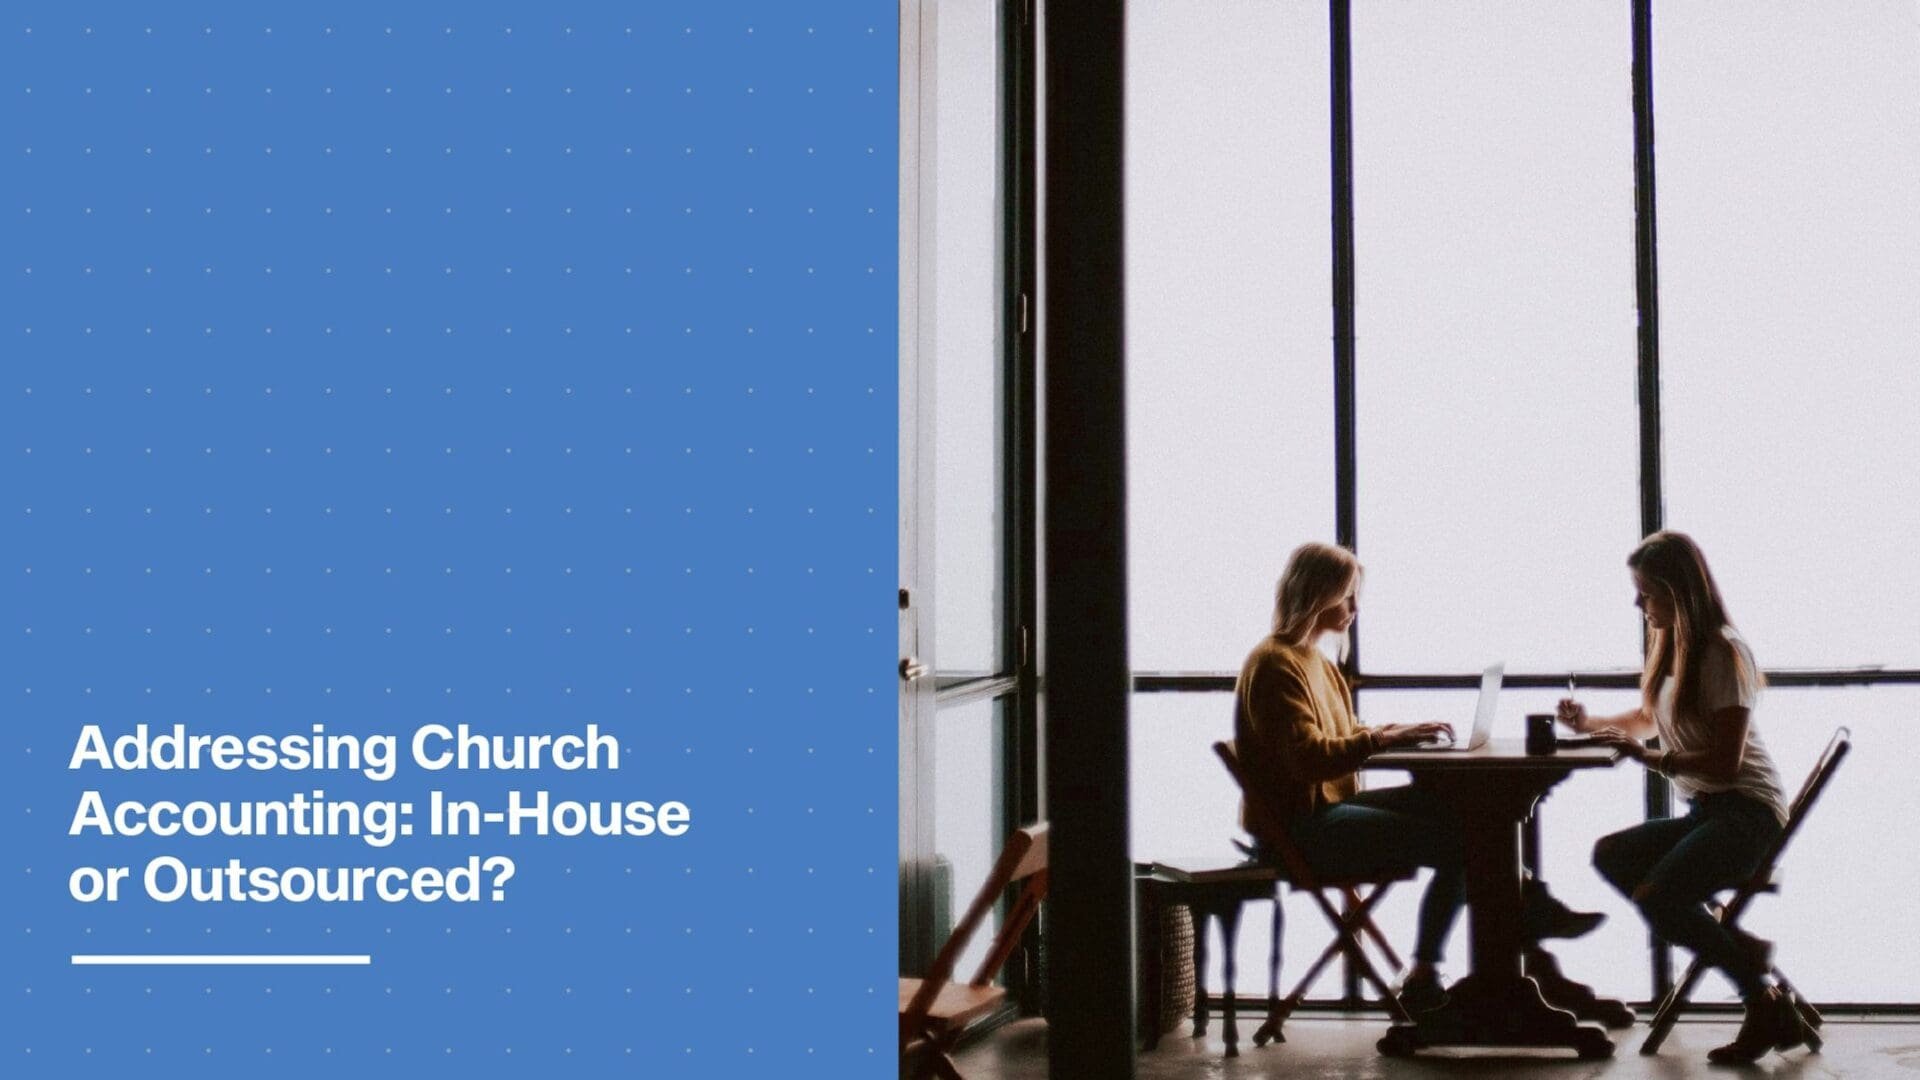 Addressing church accounting: in-house or outsourced?